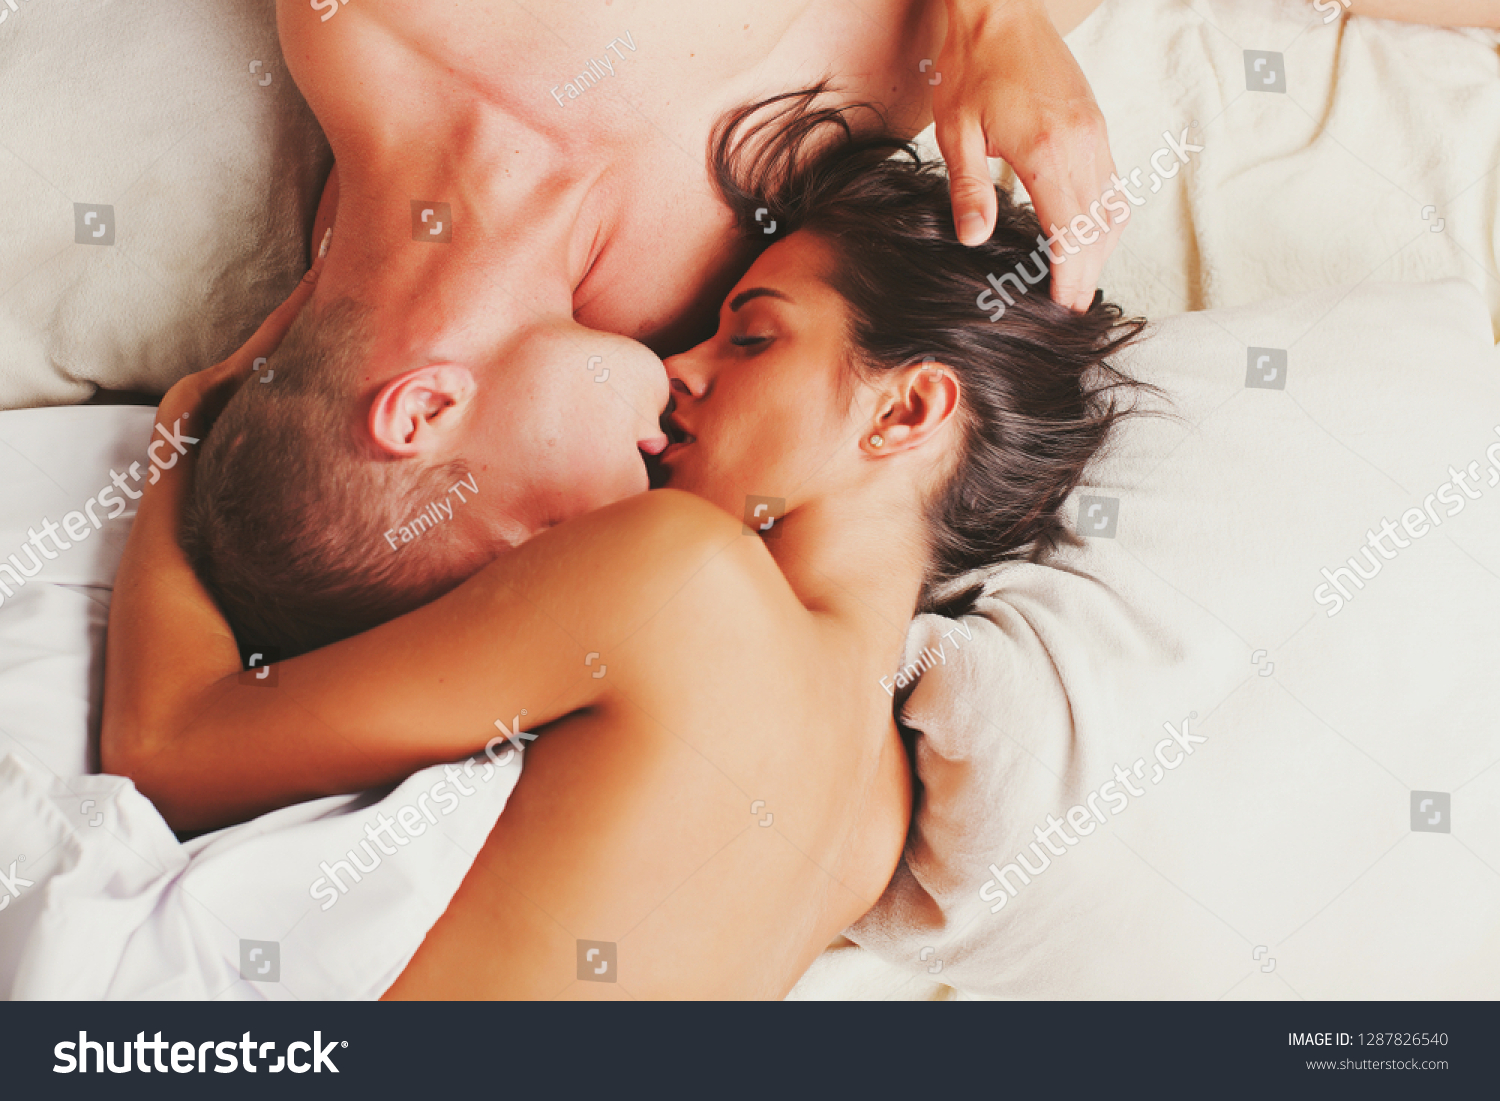 Young Nudist Kissing